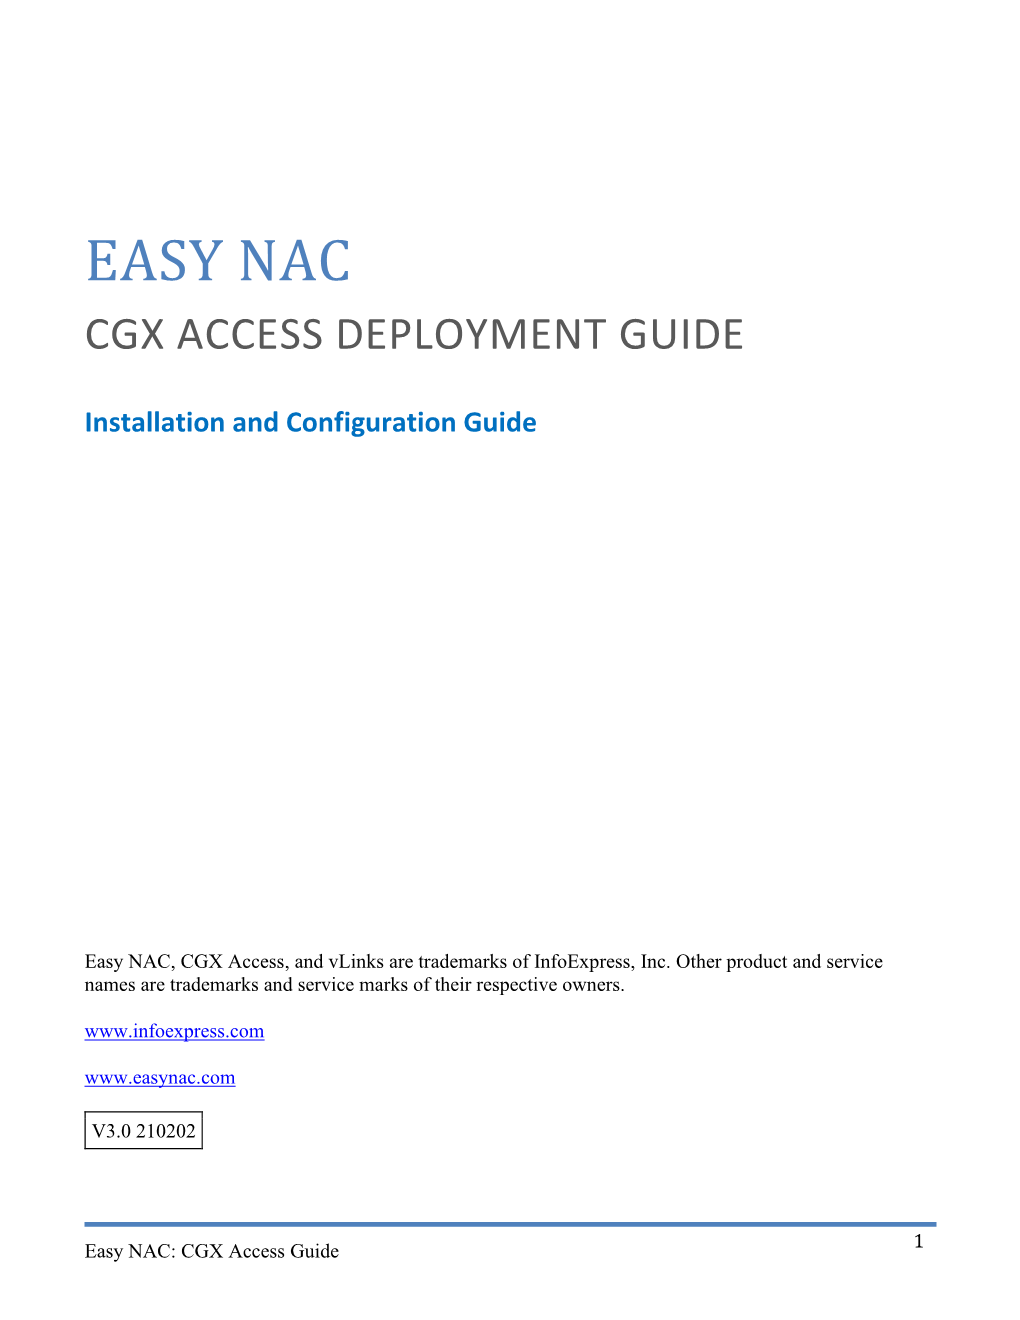 Easy NAC Solution Overview